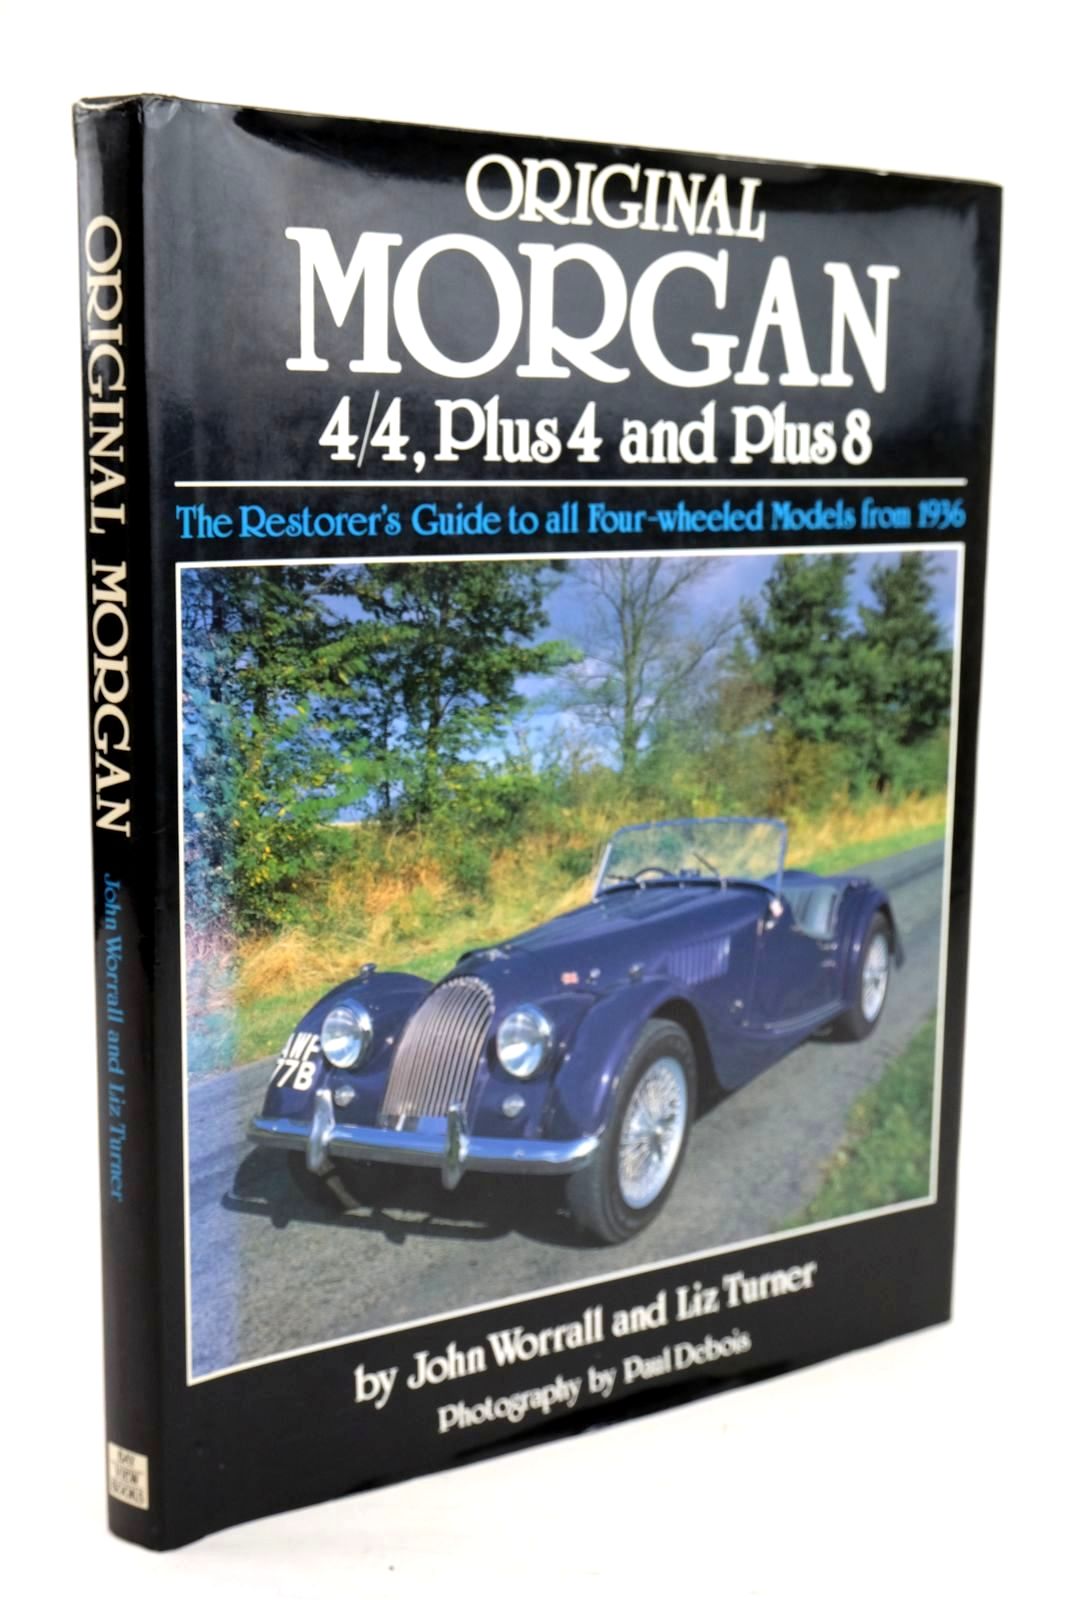 Photo of ORIGINAL MORGAN 4/4, PLUS 4 AND PLUS 8 written by Worrall, John Turner, Liz published by Bay View Books (STOCK CODE: 1820261)  for sale by Stella & Rose's Books